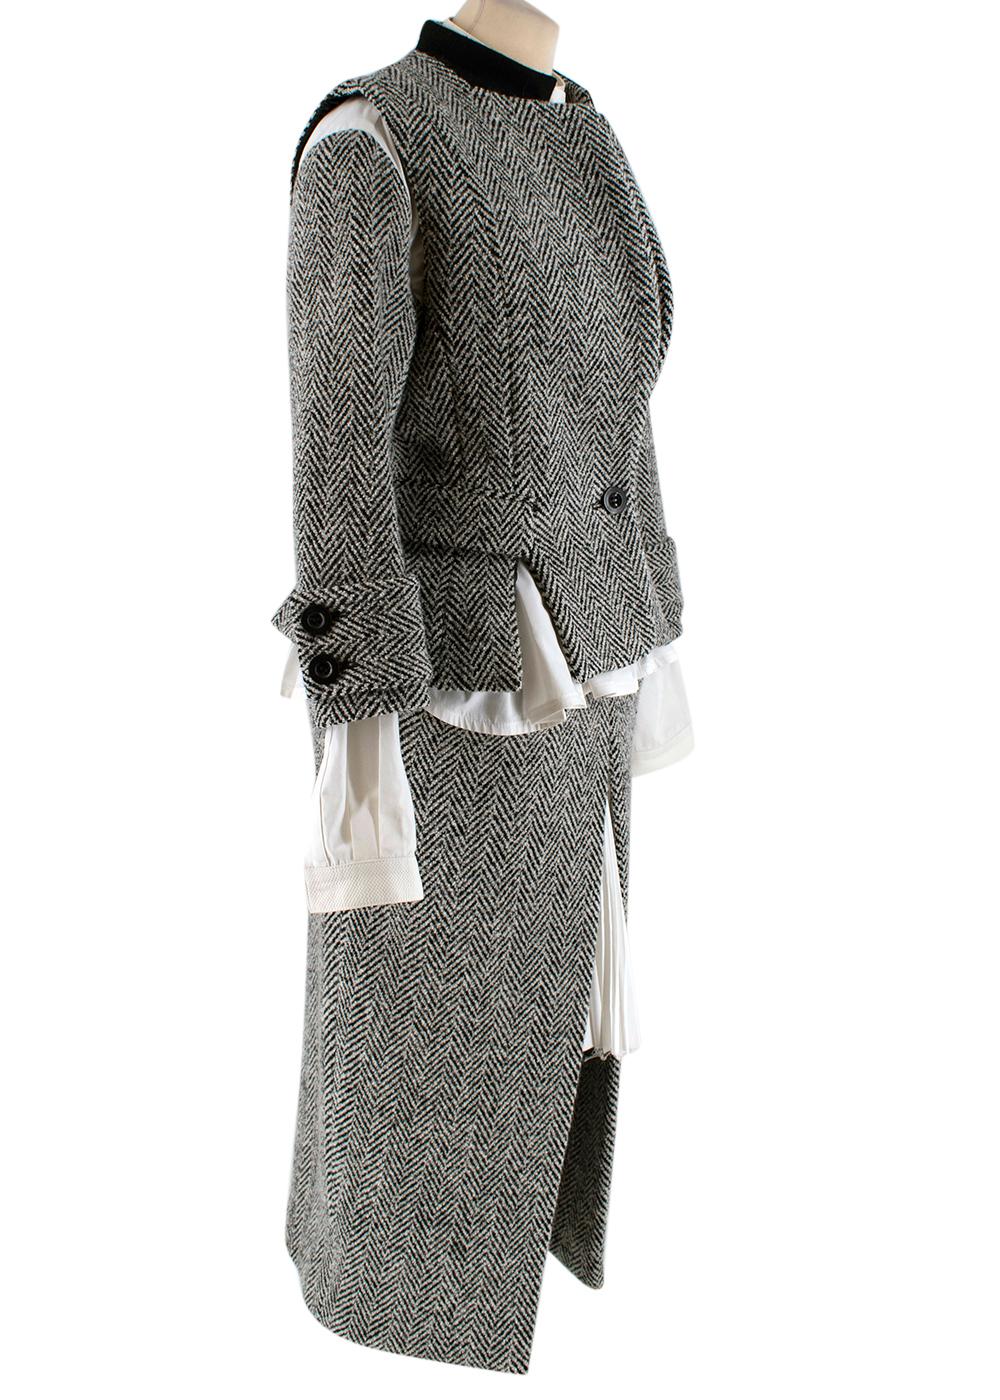 Sacai Grey Wool Chevron Tweed Layered Jacket & Skirt 

- Grey Tweed Wool long-sleeve jacket and midi length skirt
- Panelled contrast white shirt sewn into jacket 
- Peplem style 
- Single button fastening on jacket with front flap pockets, front